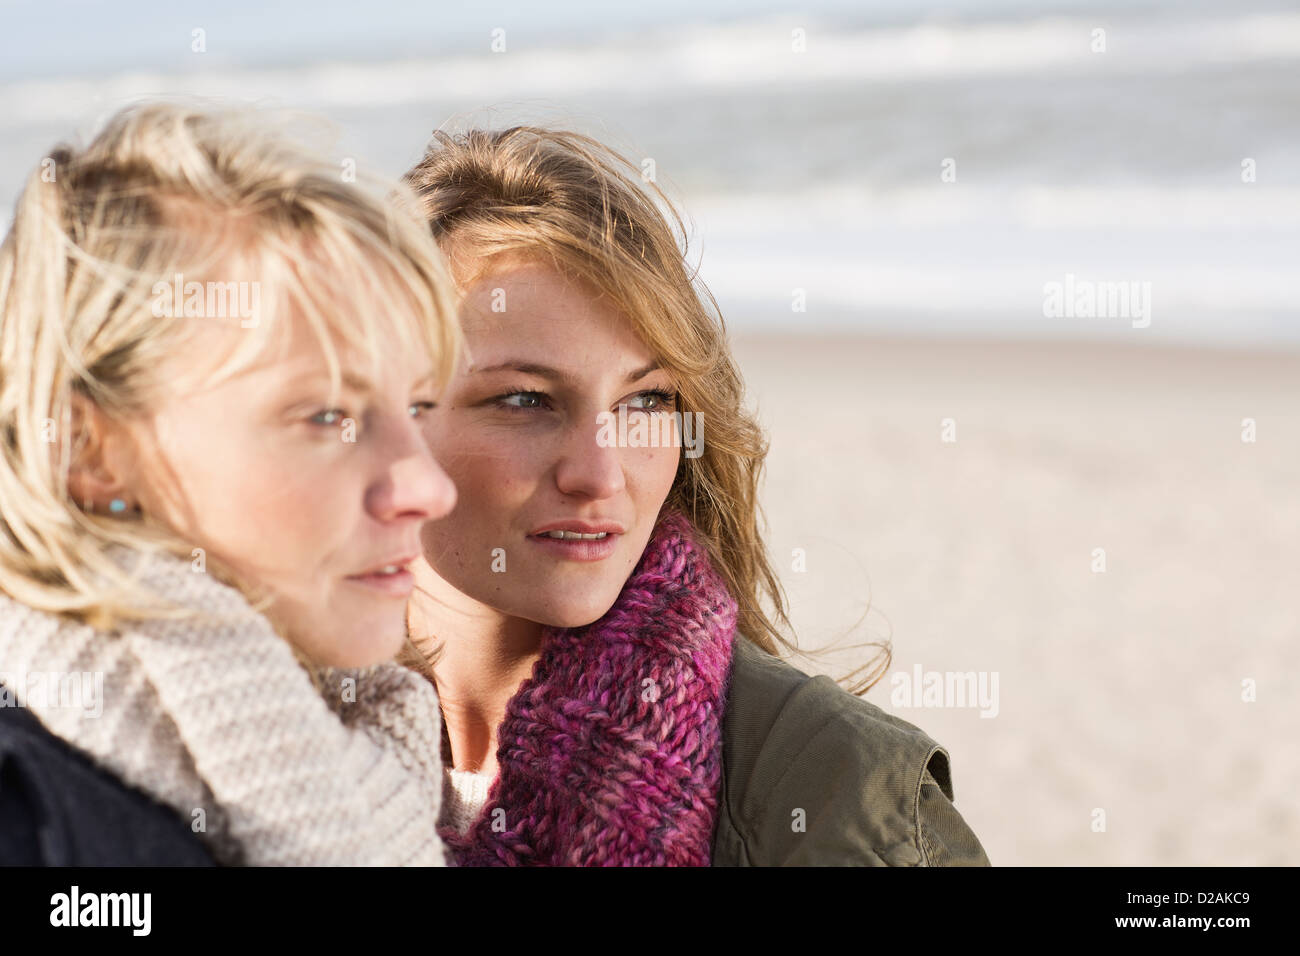 Women standing together on beach Stock Photo